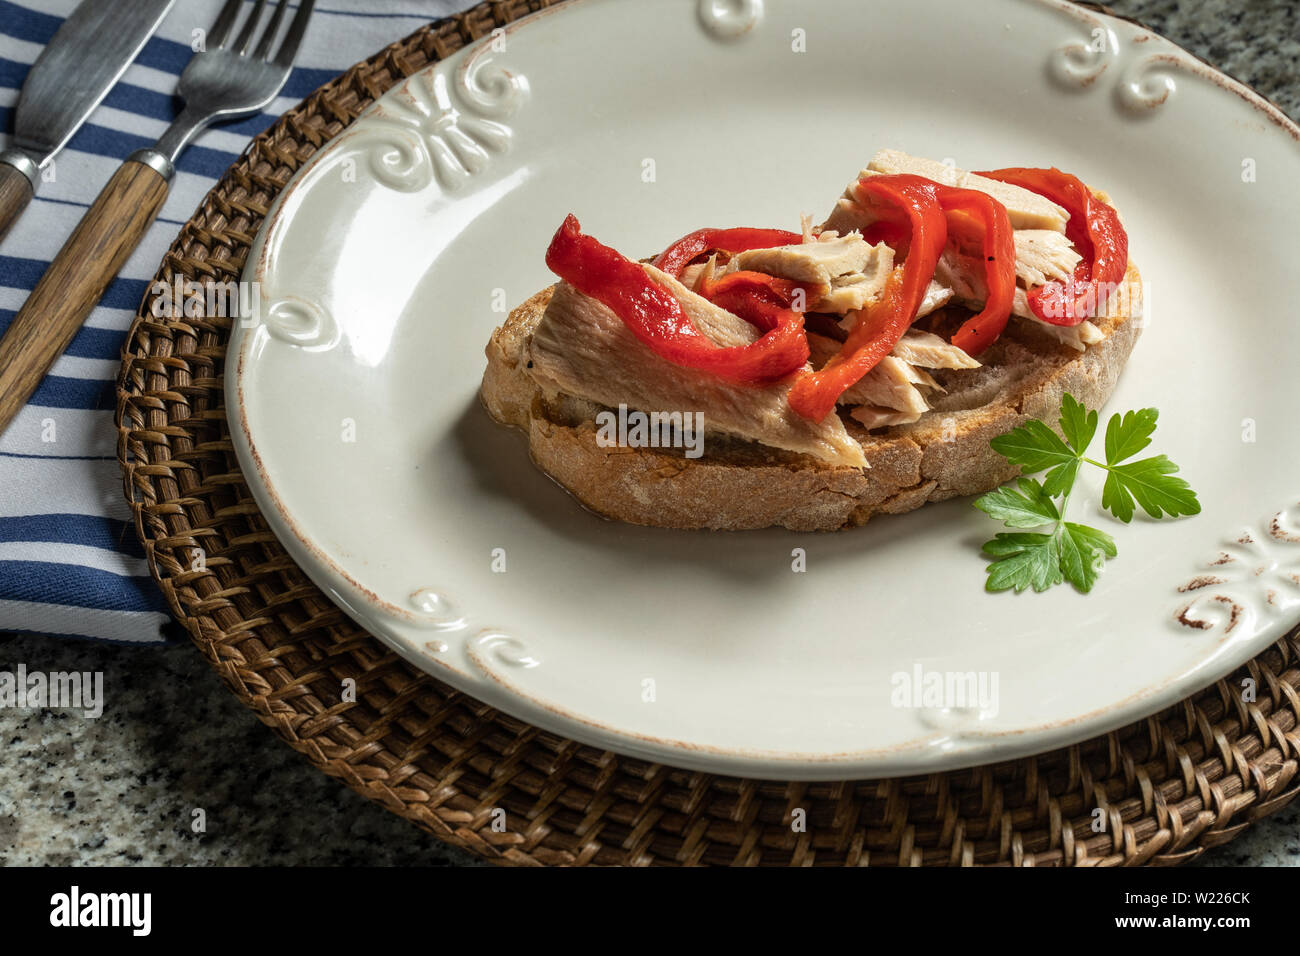 Tasty open sandwich or toast with tuna and red peppers on plate. Mediterranean cuisine Stock Photo